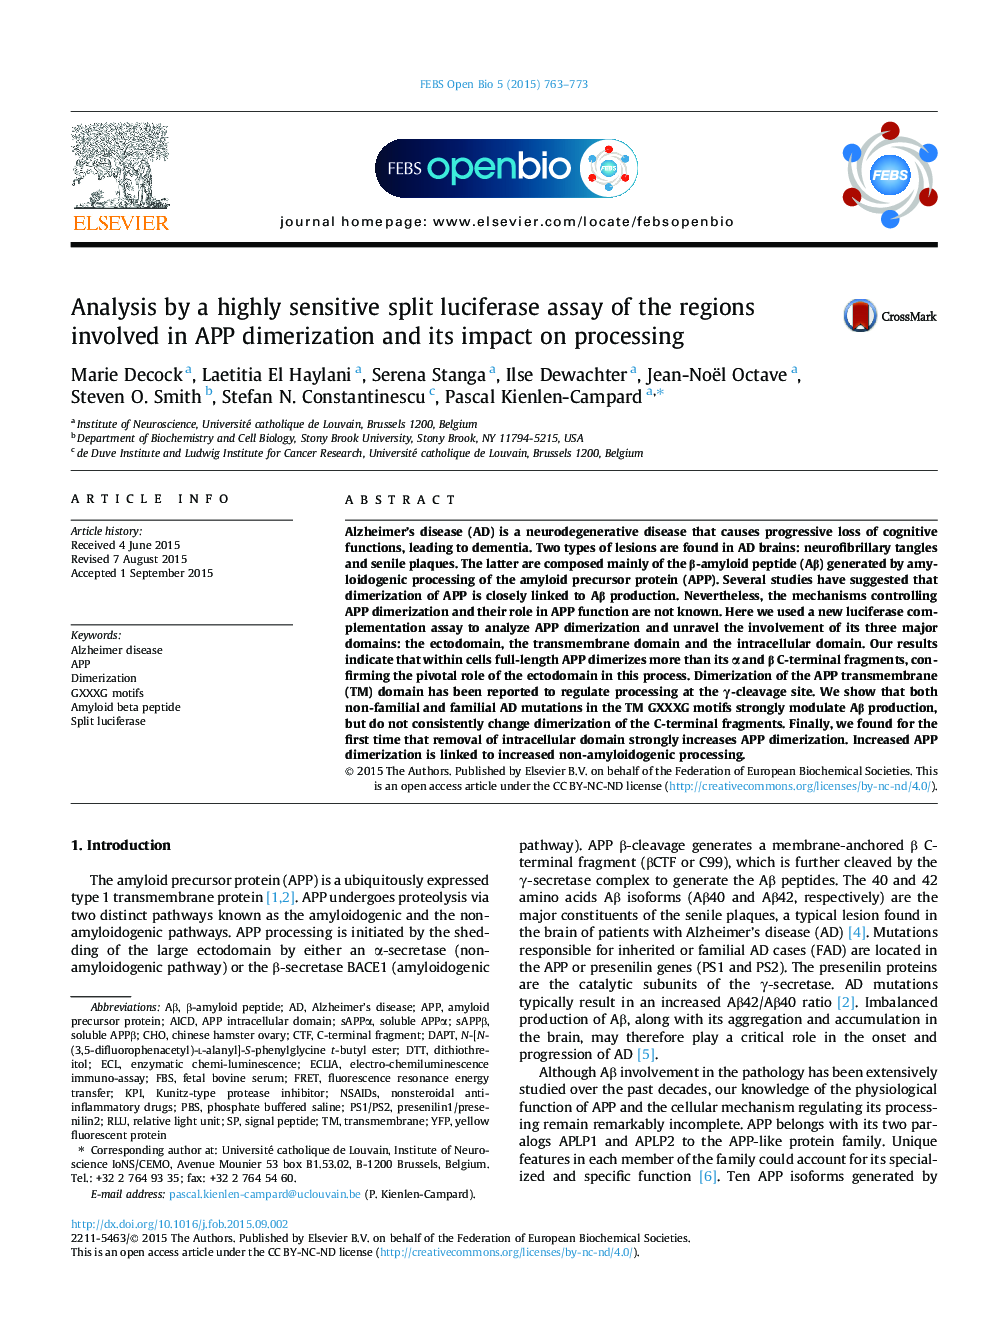 Analysis by a highly sensitive split luciferase assay of the regions involved in APP dimerization and its impact on processing